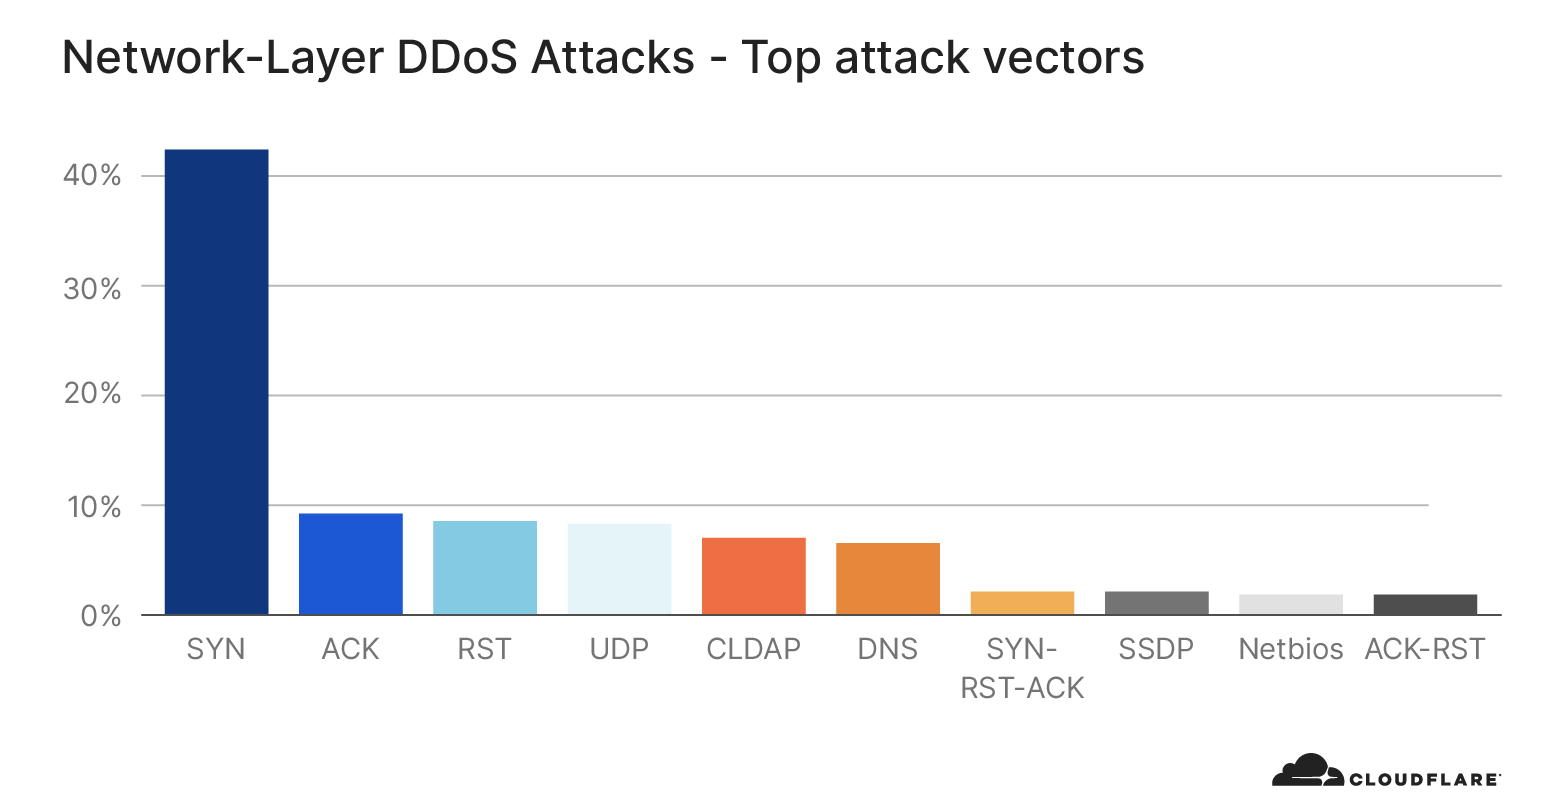 Network-layer DDoS attack trends for Q4 2020